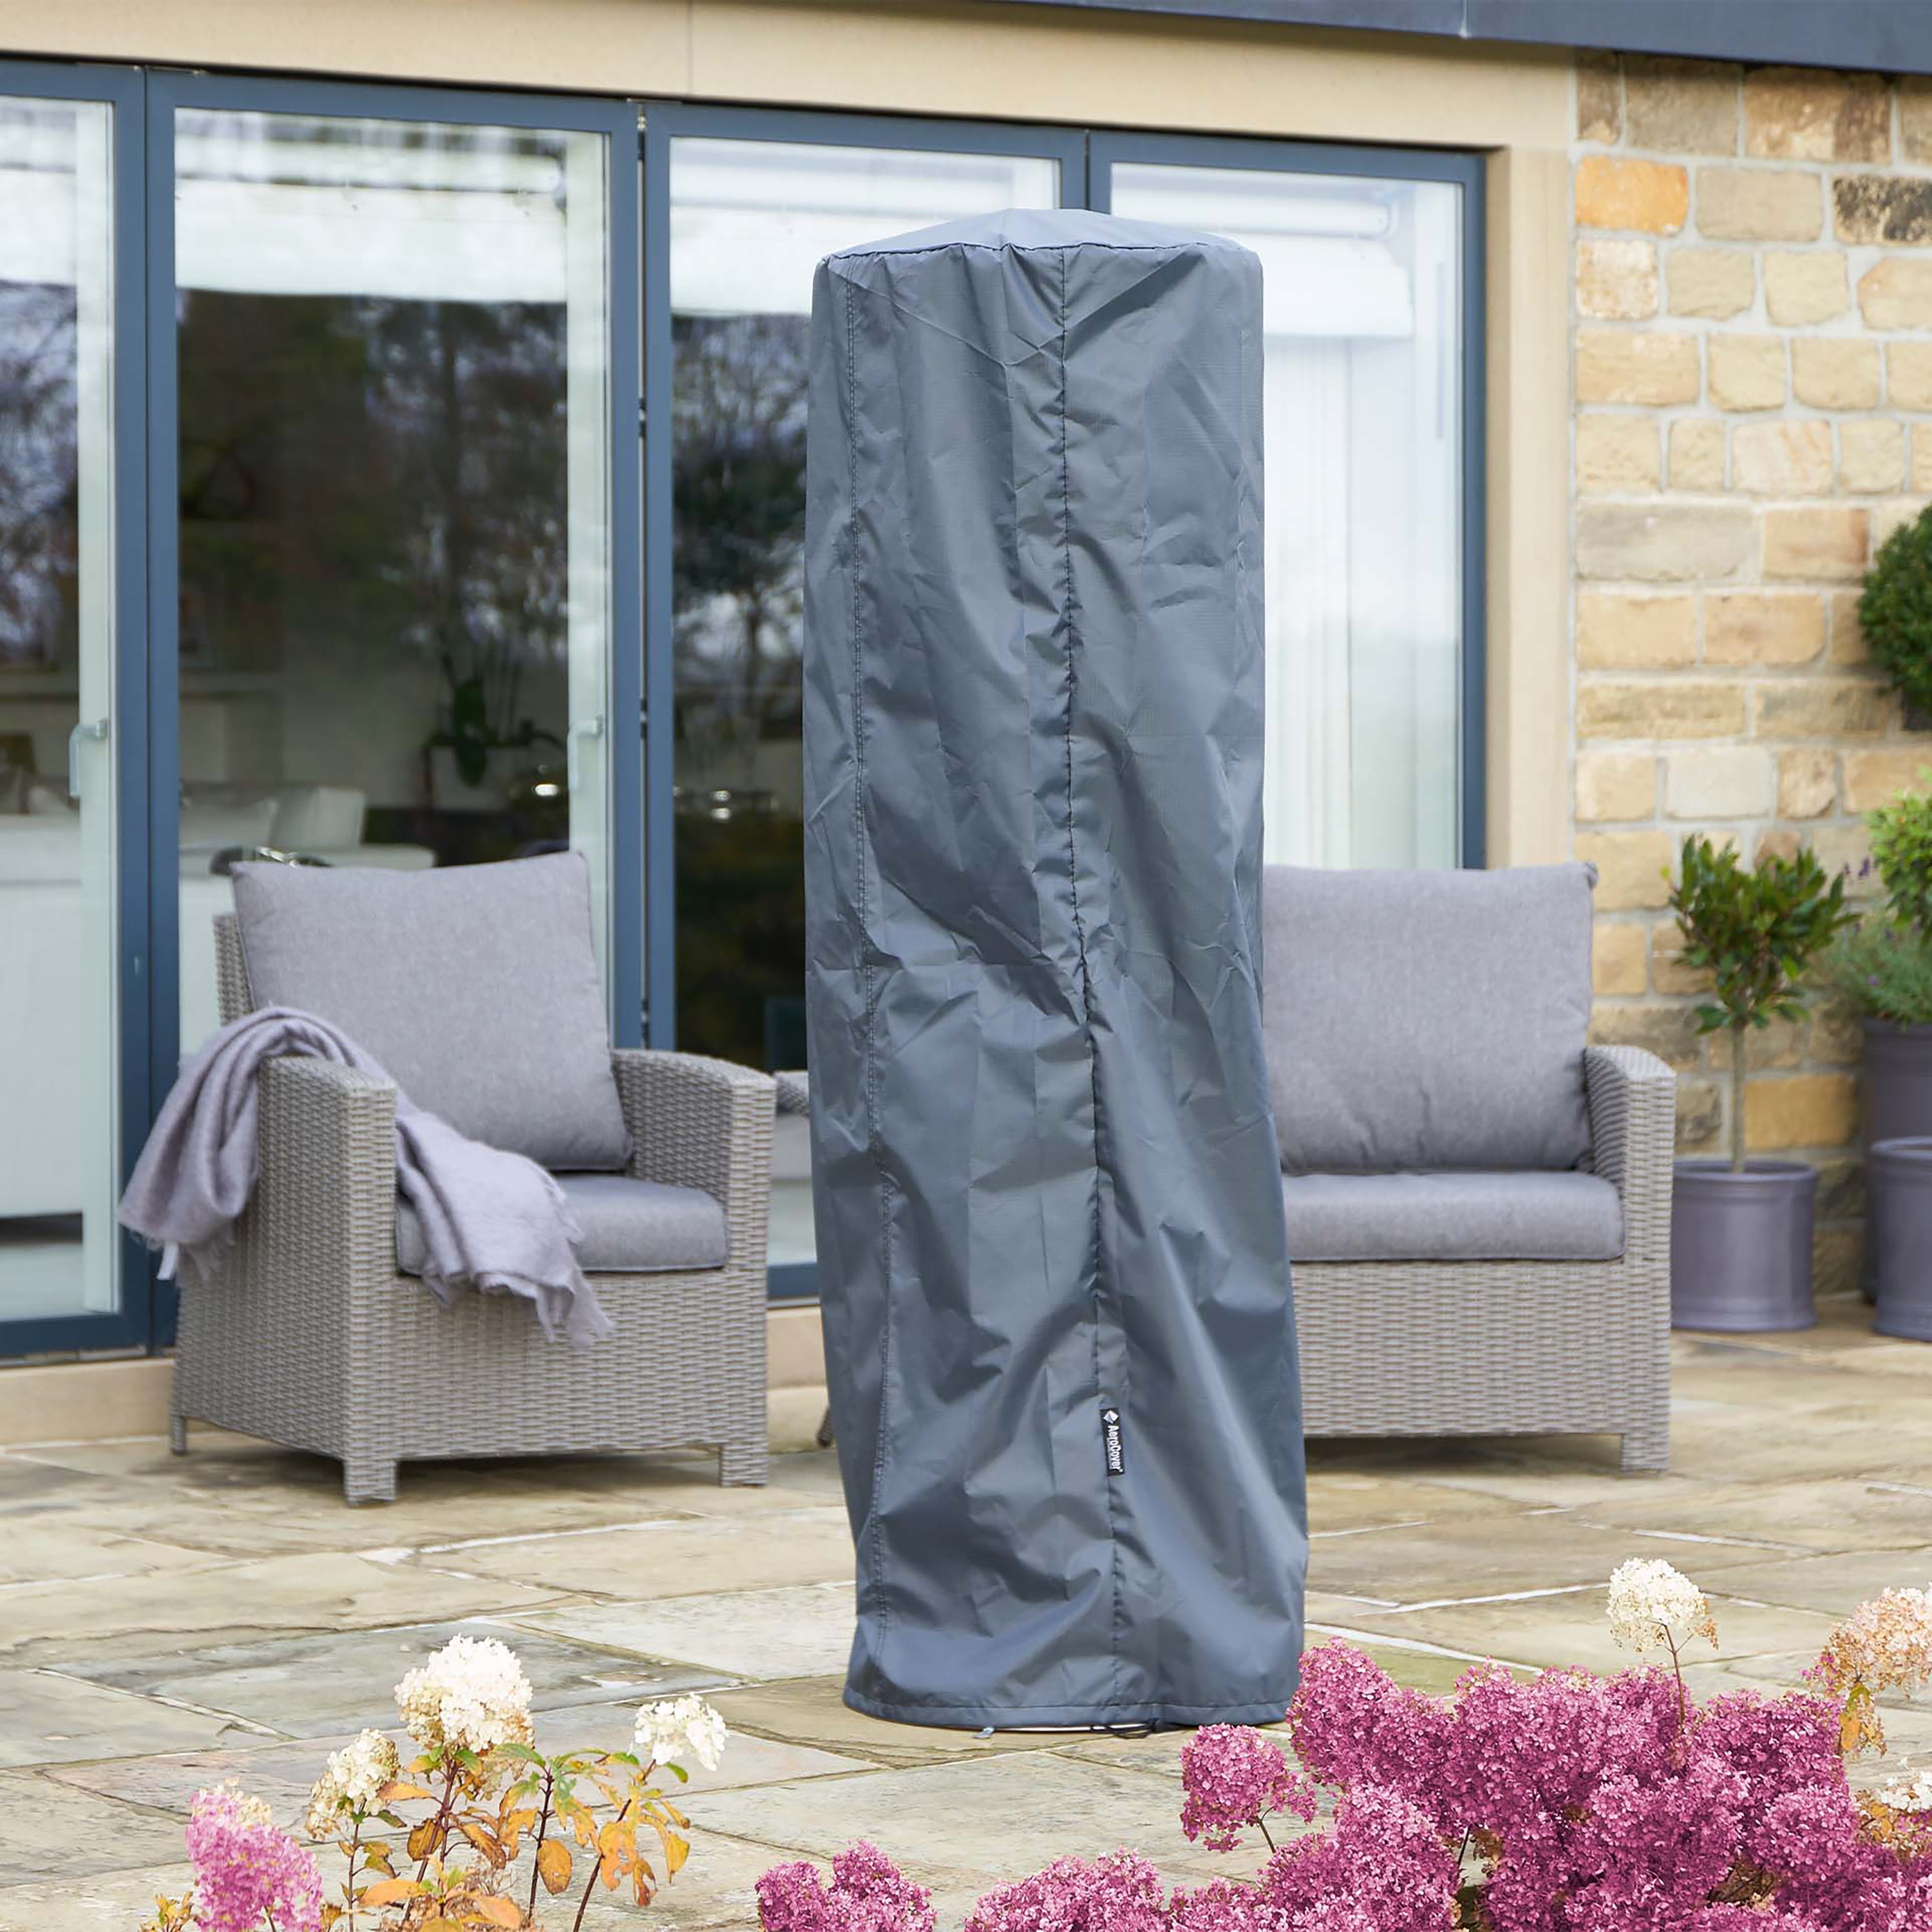 Aerocover Cylinder Patio Heater Cover